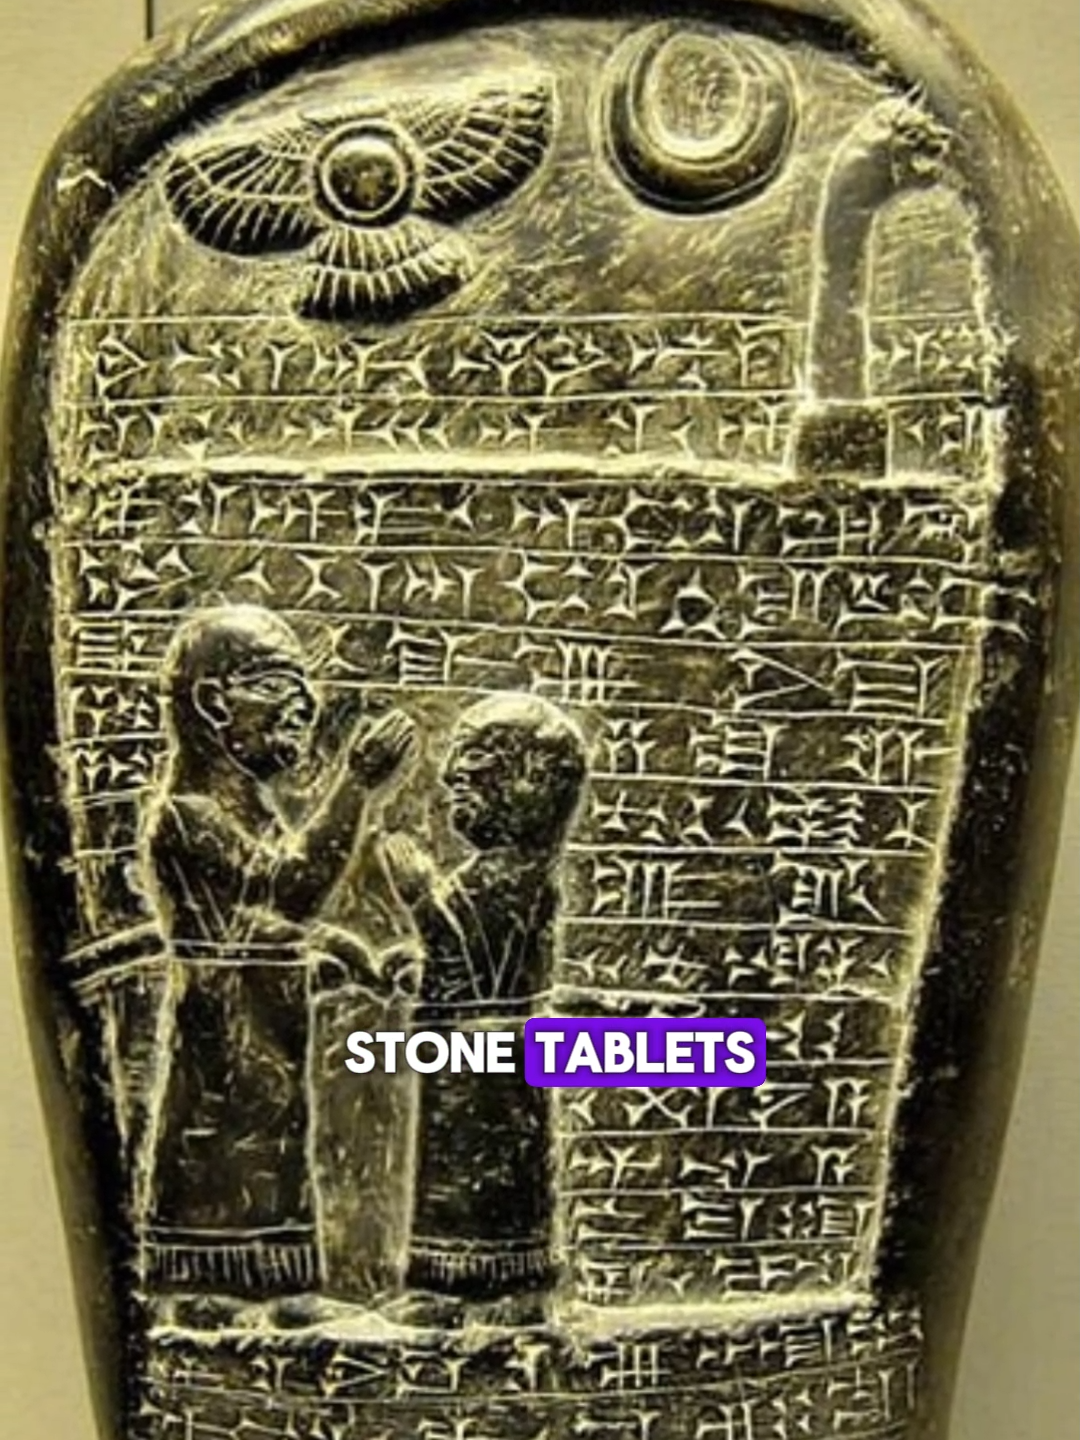 These People Were Talking About Some Super Advanced Technology In The Ancient Times. Ancient Tablets. #billycarson #ancienthistory #knowledge #information #history